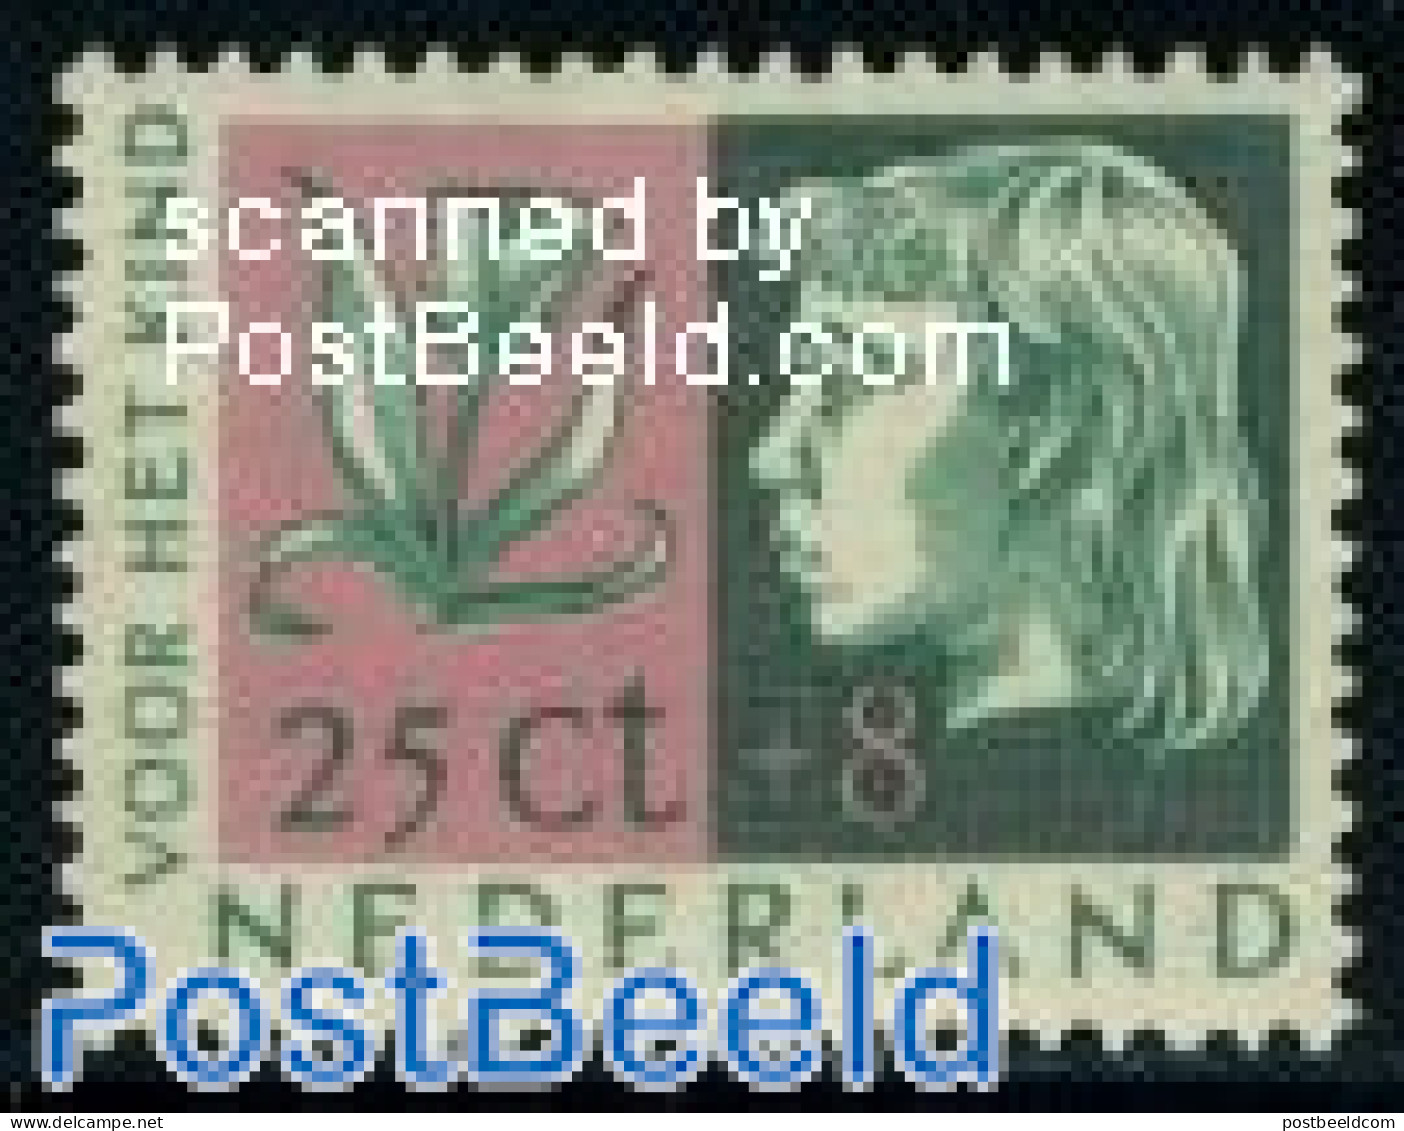 Netherlands 1953 25+8c, Stamp Out Of Set, Mint NH, Nature - Flowers & Plants - Nuovi